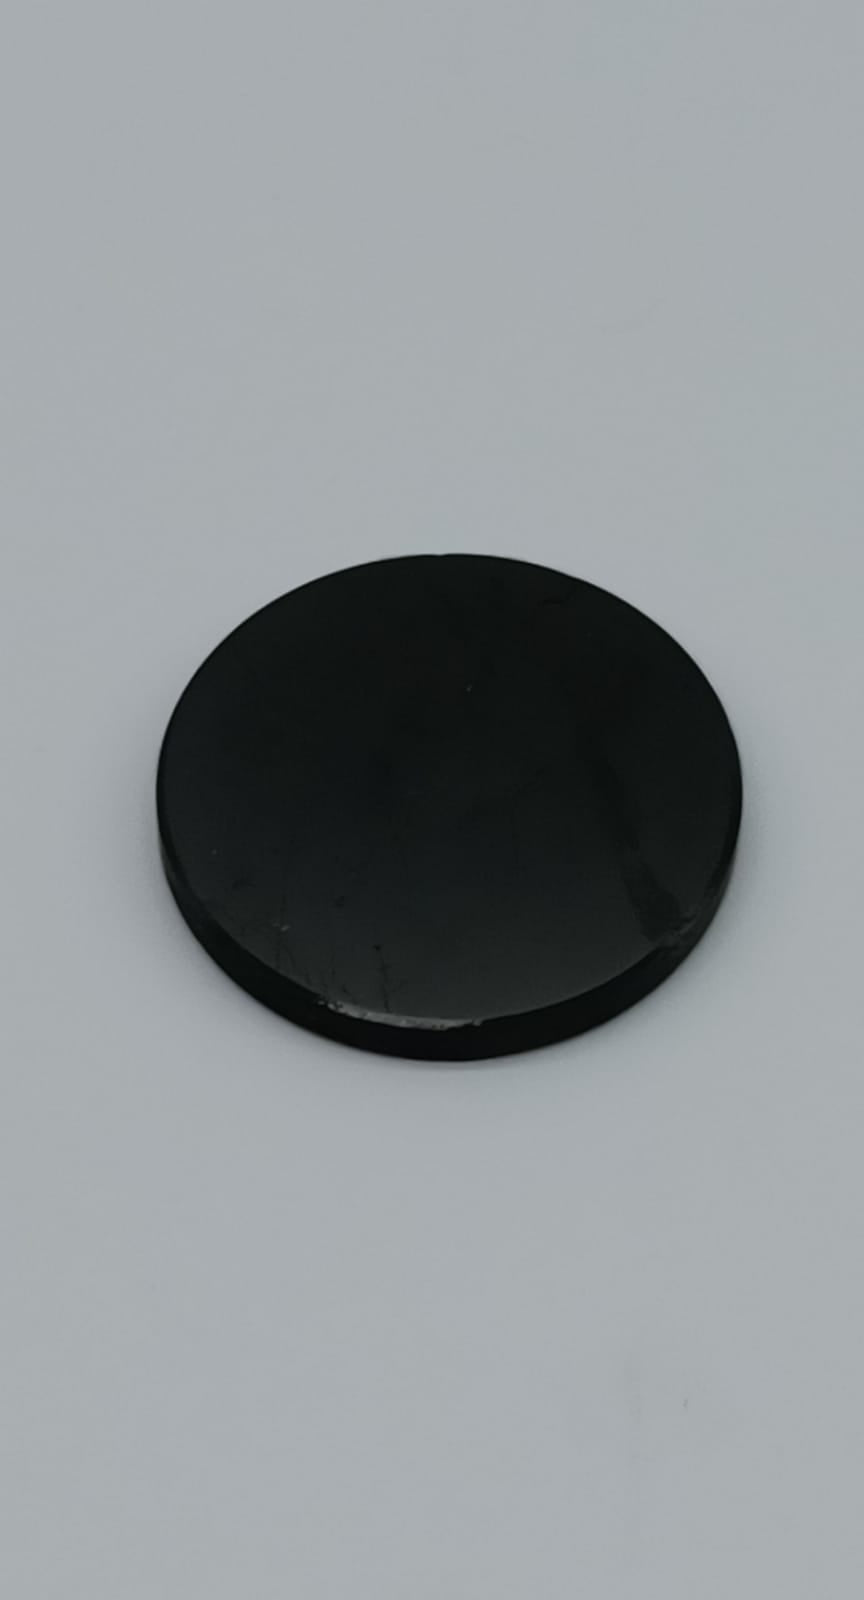 Shungite EMF Protector for Electrical Appliances